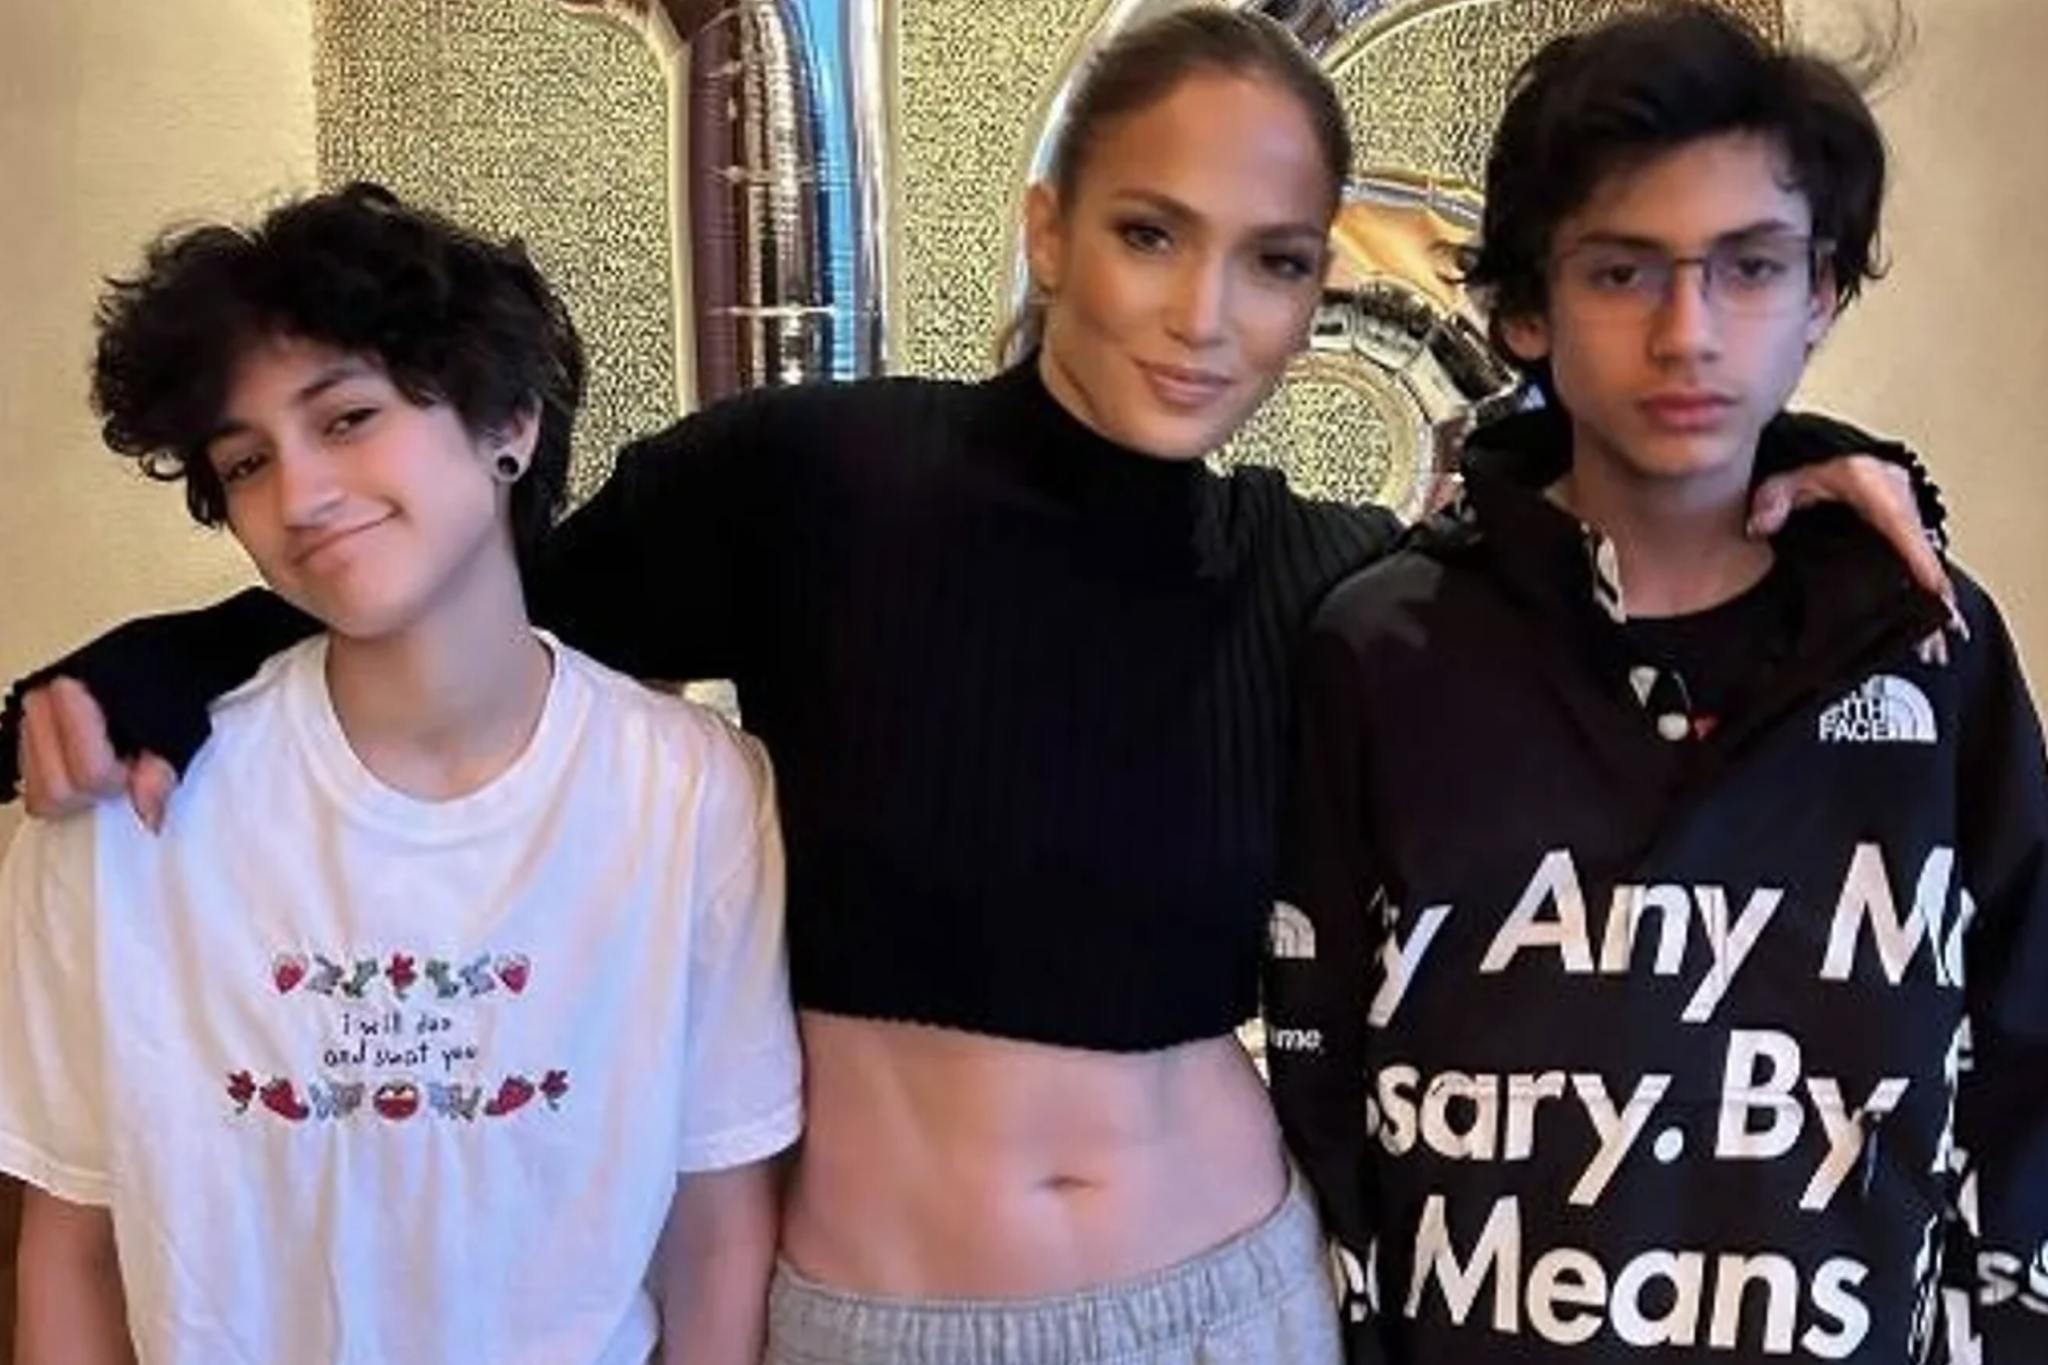 Jennifer Lopez celebrated her twins Emme and Maxs 16th birthday with a trip to Japan